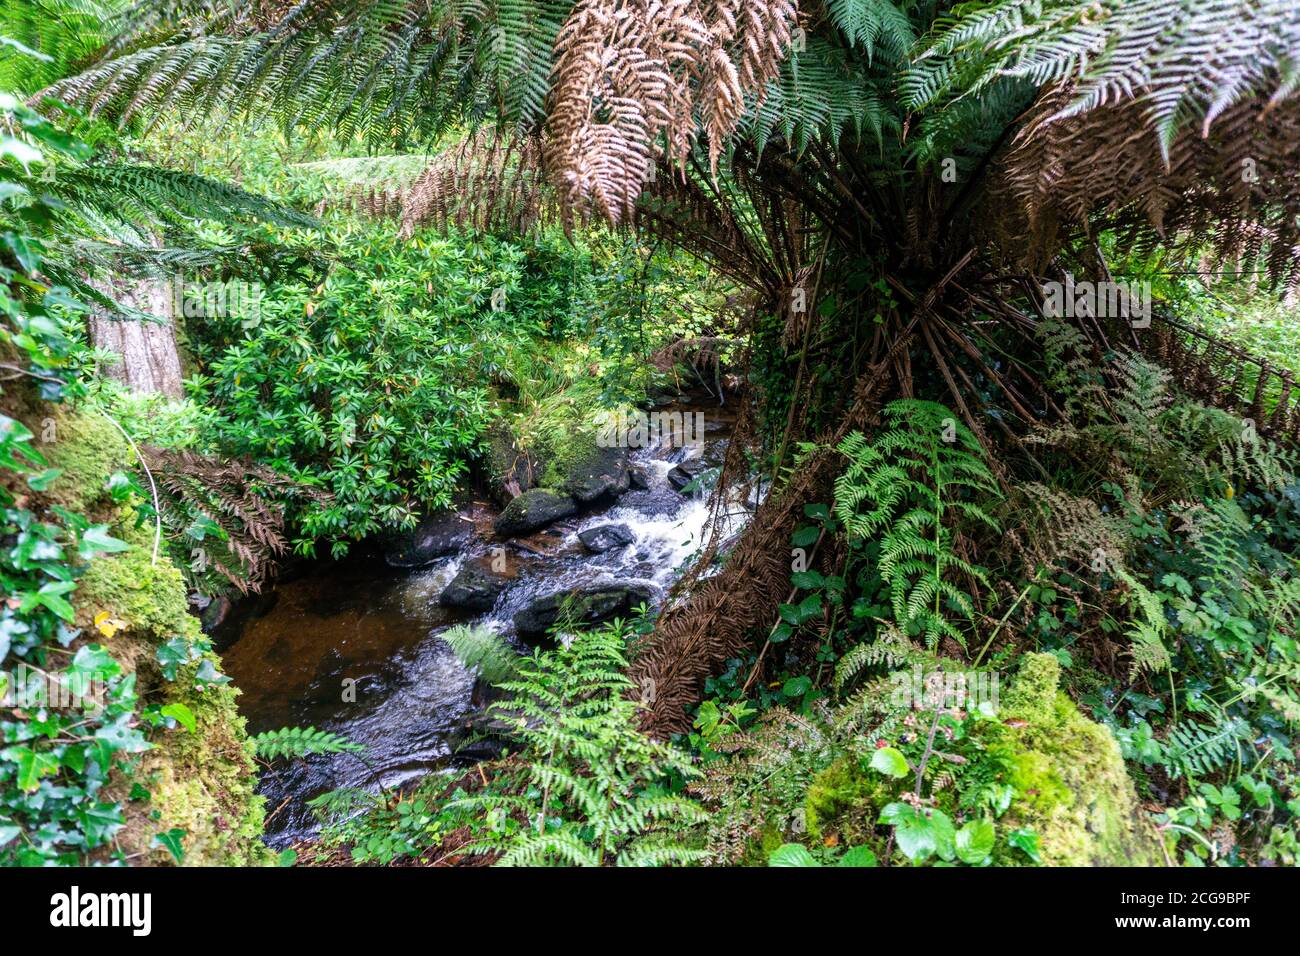 The fast flowing  Deligeenagh River that tumbles through the sub tropical  Kells Bay Gardens in Kells, County Kerry, Ireland. Stock Photo